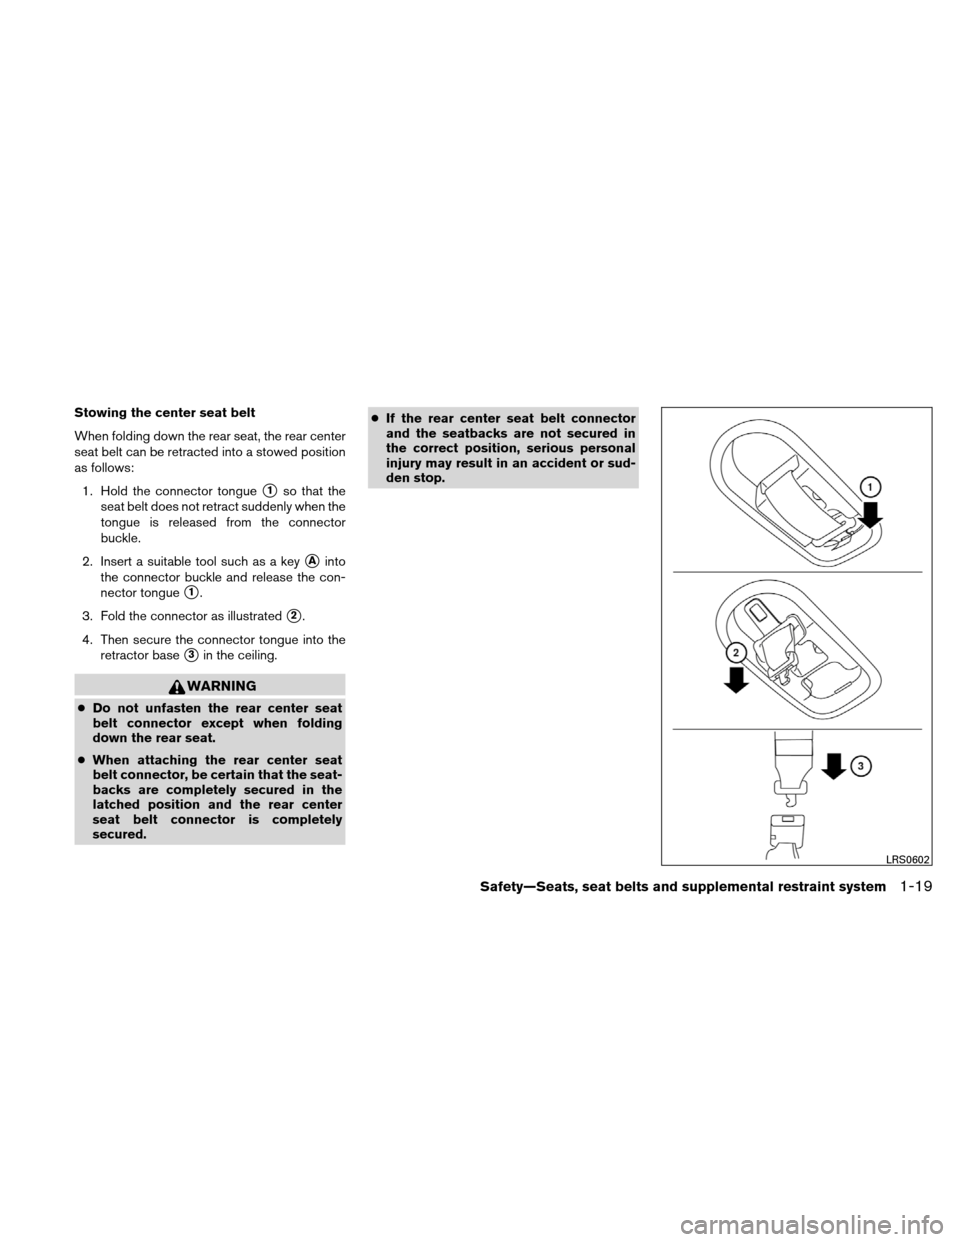 NISSAN XTERRA 2011 N50 / 2.G Owners Manual Stowing the center seat belt
When folding down the rear seat, the rear center
seat belt can be retracted into a stowed position
as follows:1. Hold the connector tongue
1so that the
seat belt does not